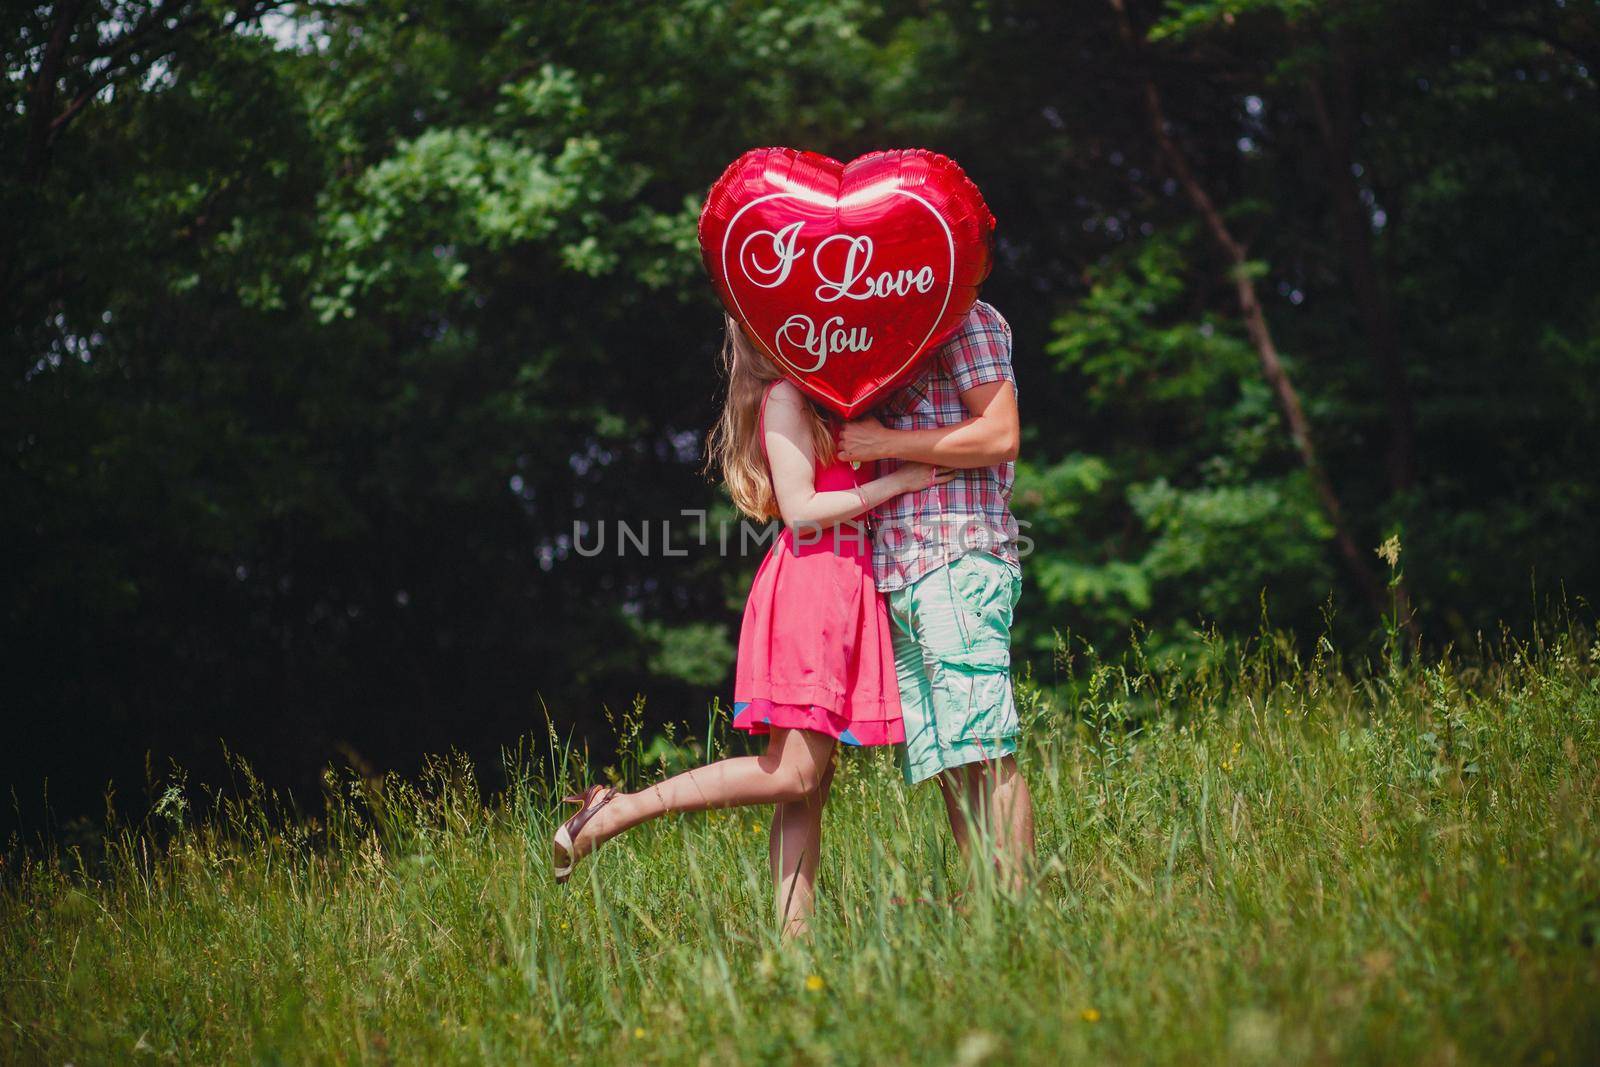 Young lovers hidden by helium balloons